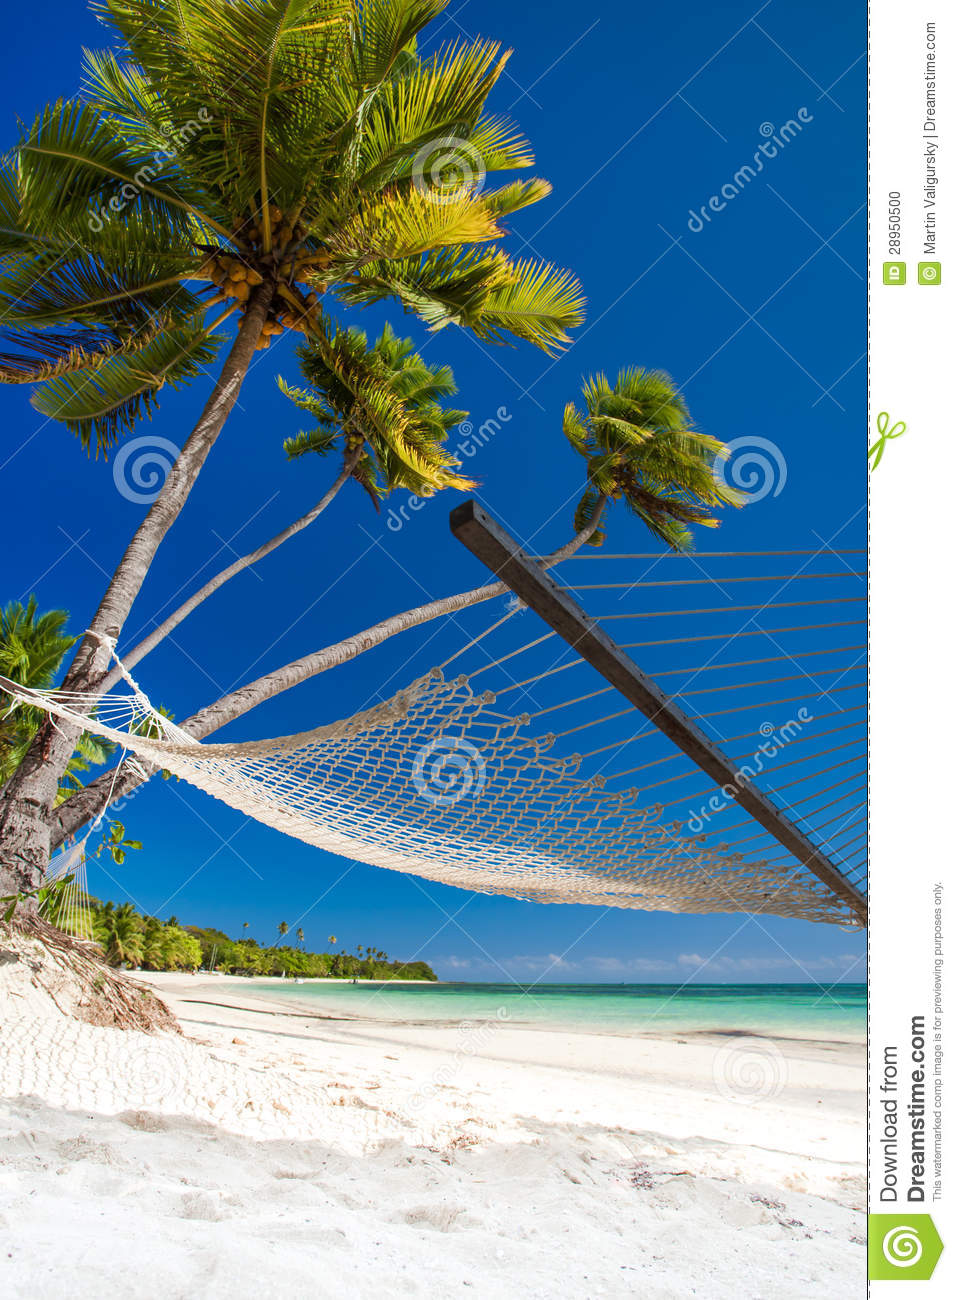 Empty Hammock Under Palm Trees And Details Of Sand Stock Photo   Image